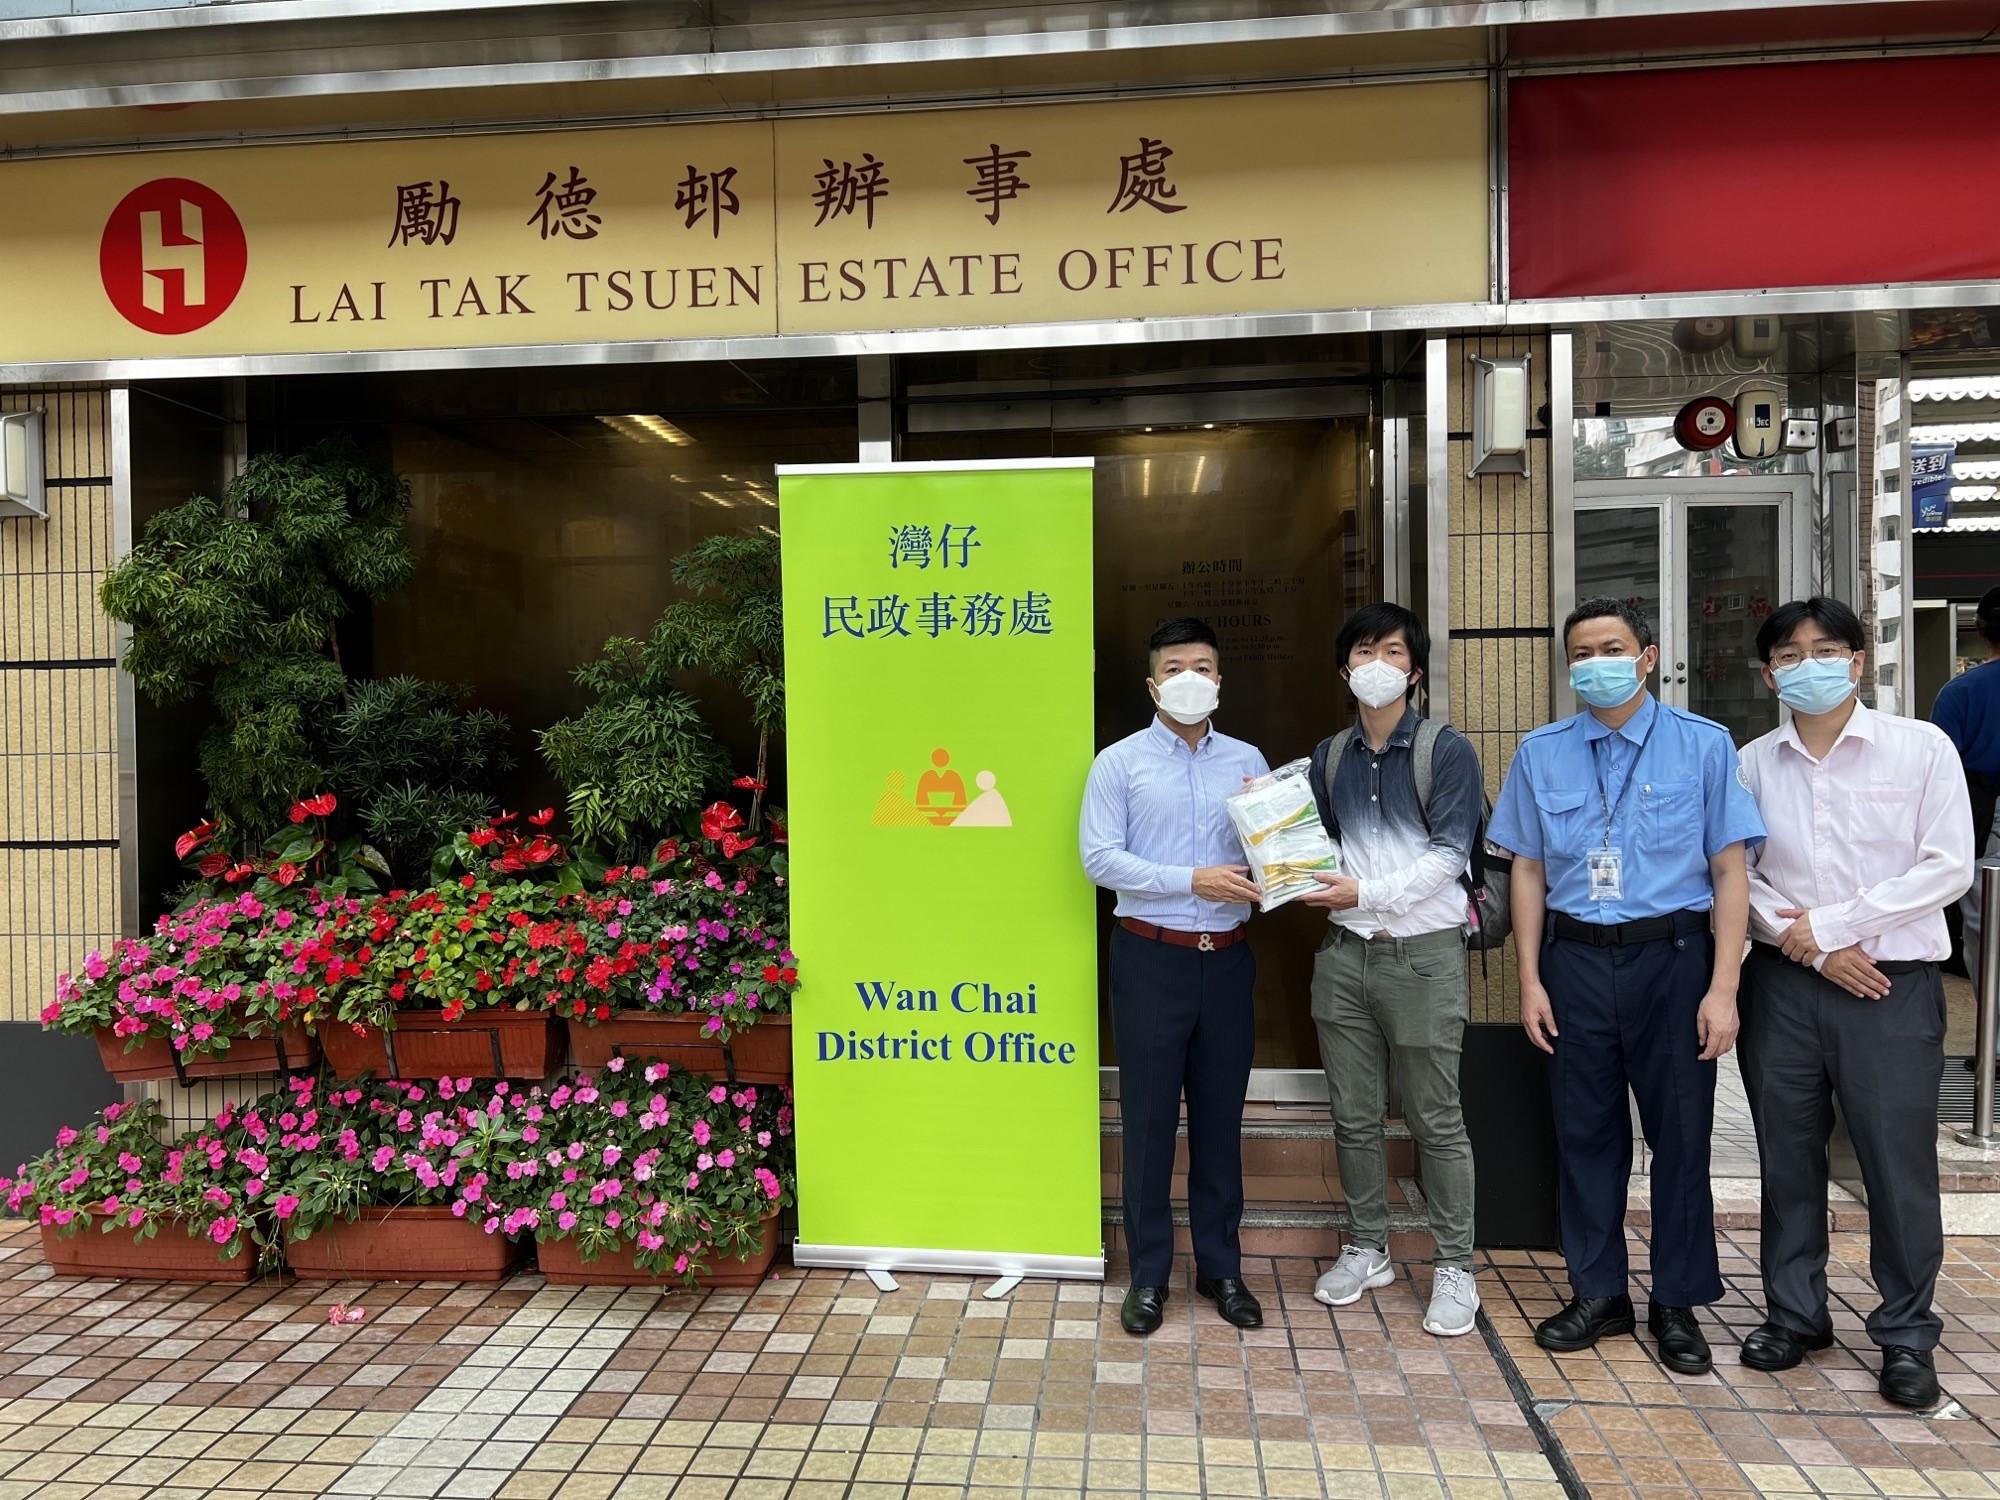 The Wan Chai District Office today (May 24) distributed COVID-19 rapid test kits to households, cleansing workers and property management staff living and working in Lai Tak Tsuen for voluntary testing through the property management company.